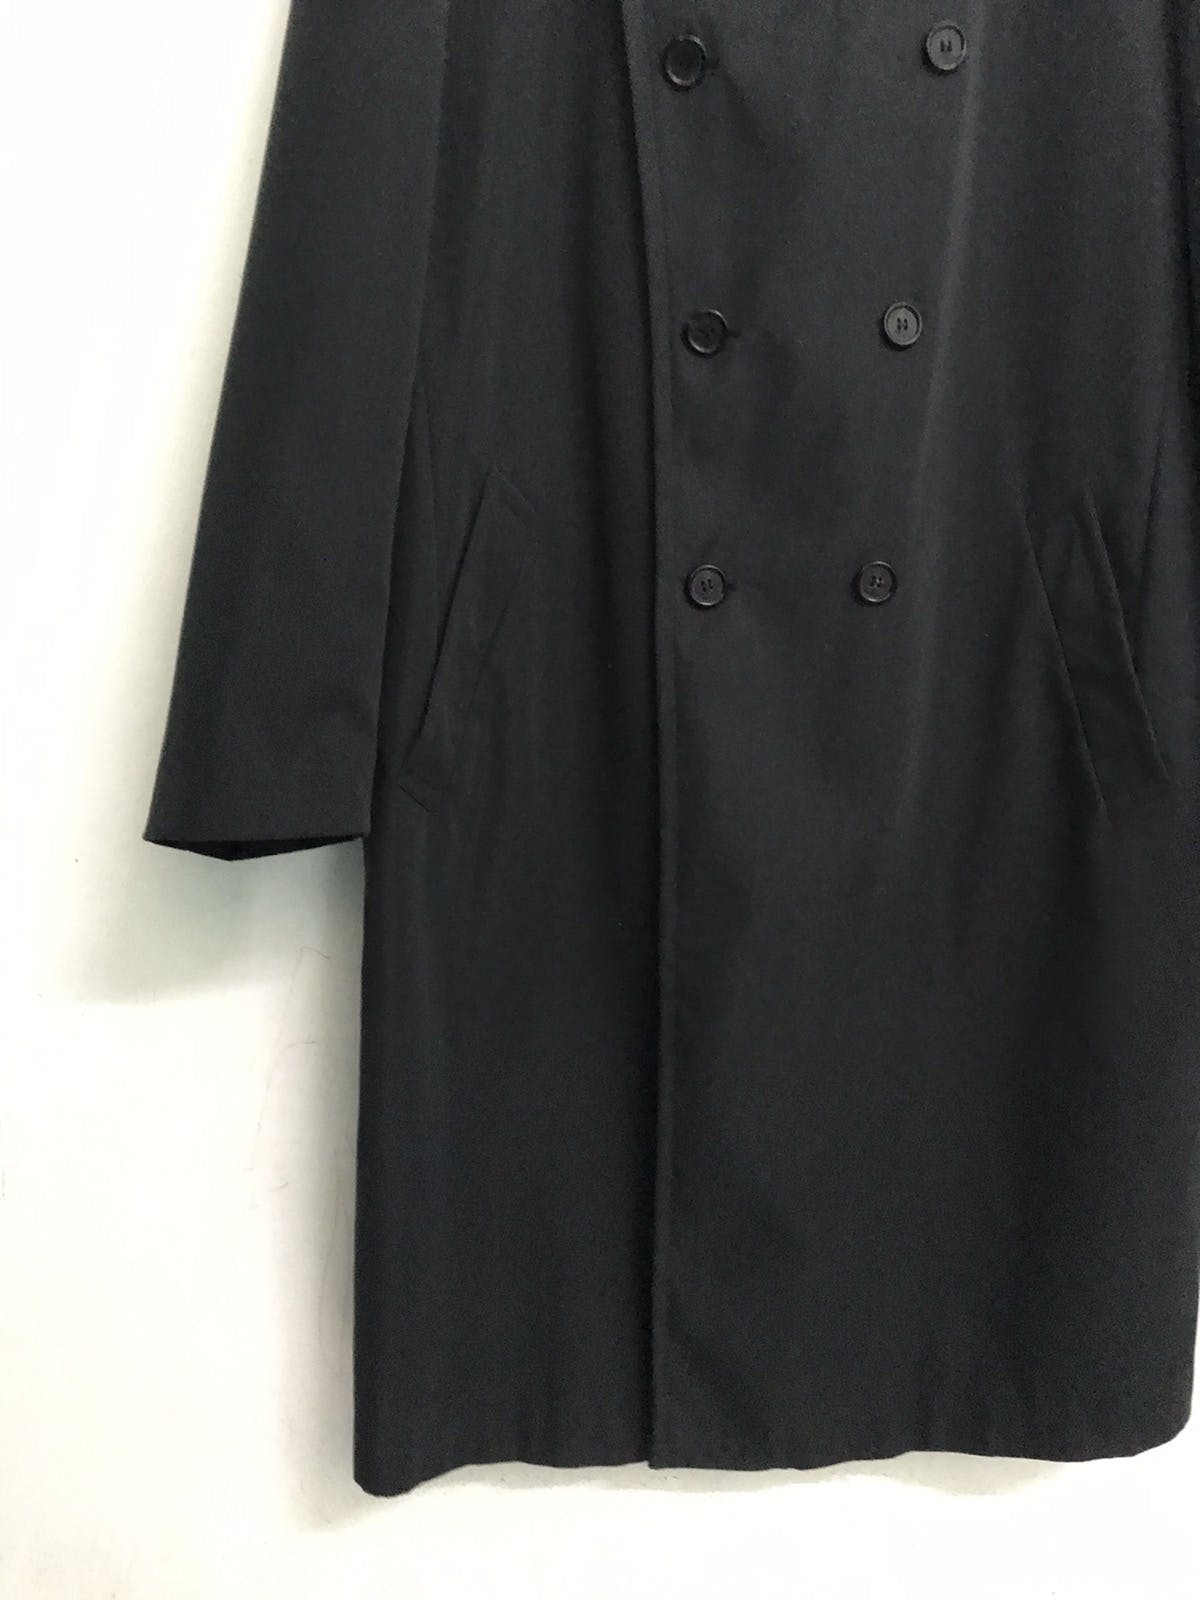 Gucci Long Coat/Jacket Made in Italy - 5